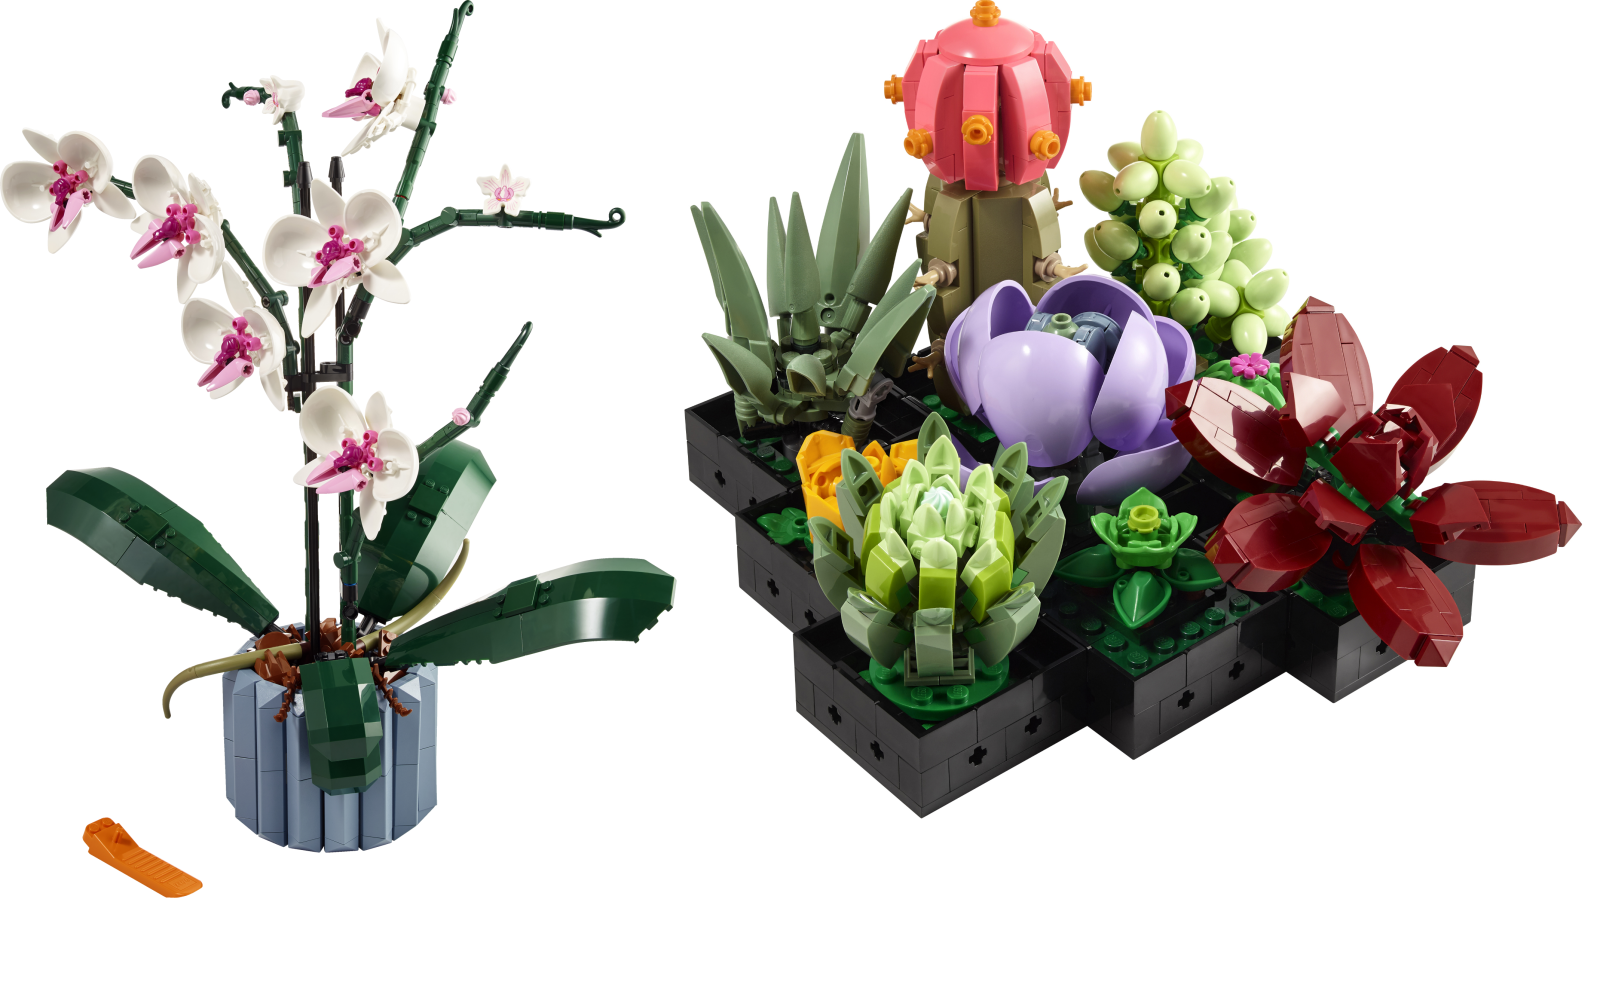 Botanical collection sets officially revealed